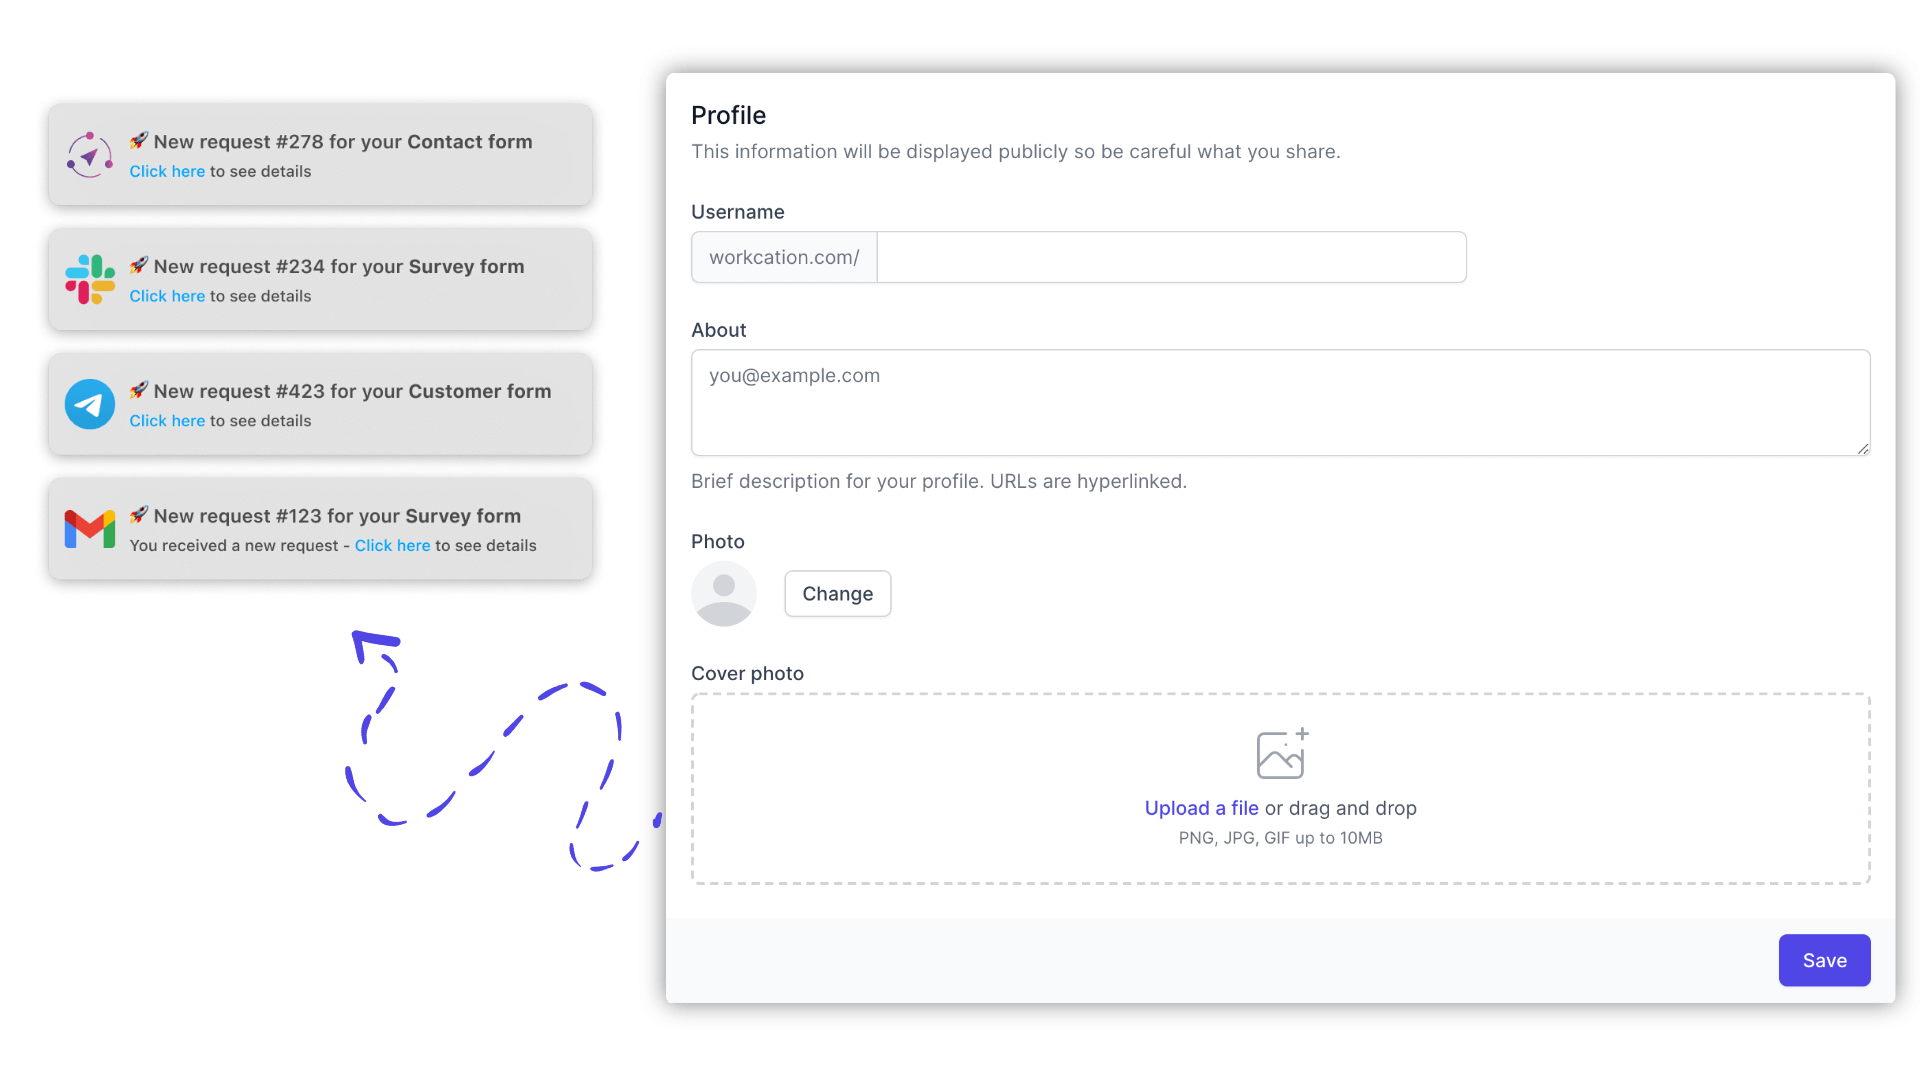 Send forms and get instant notifications